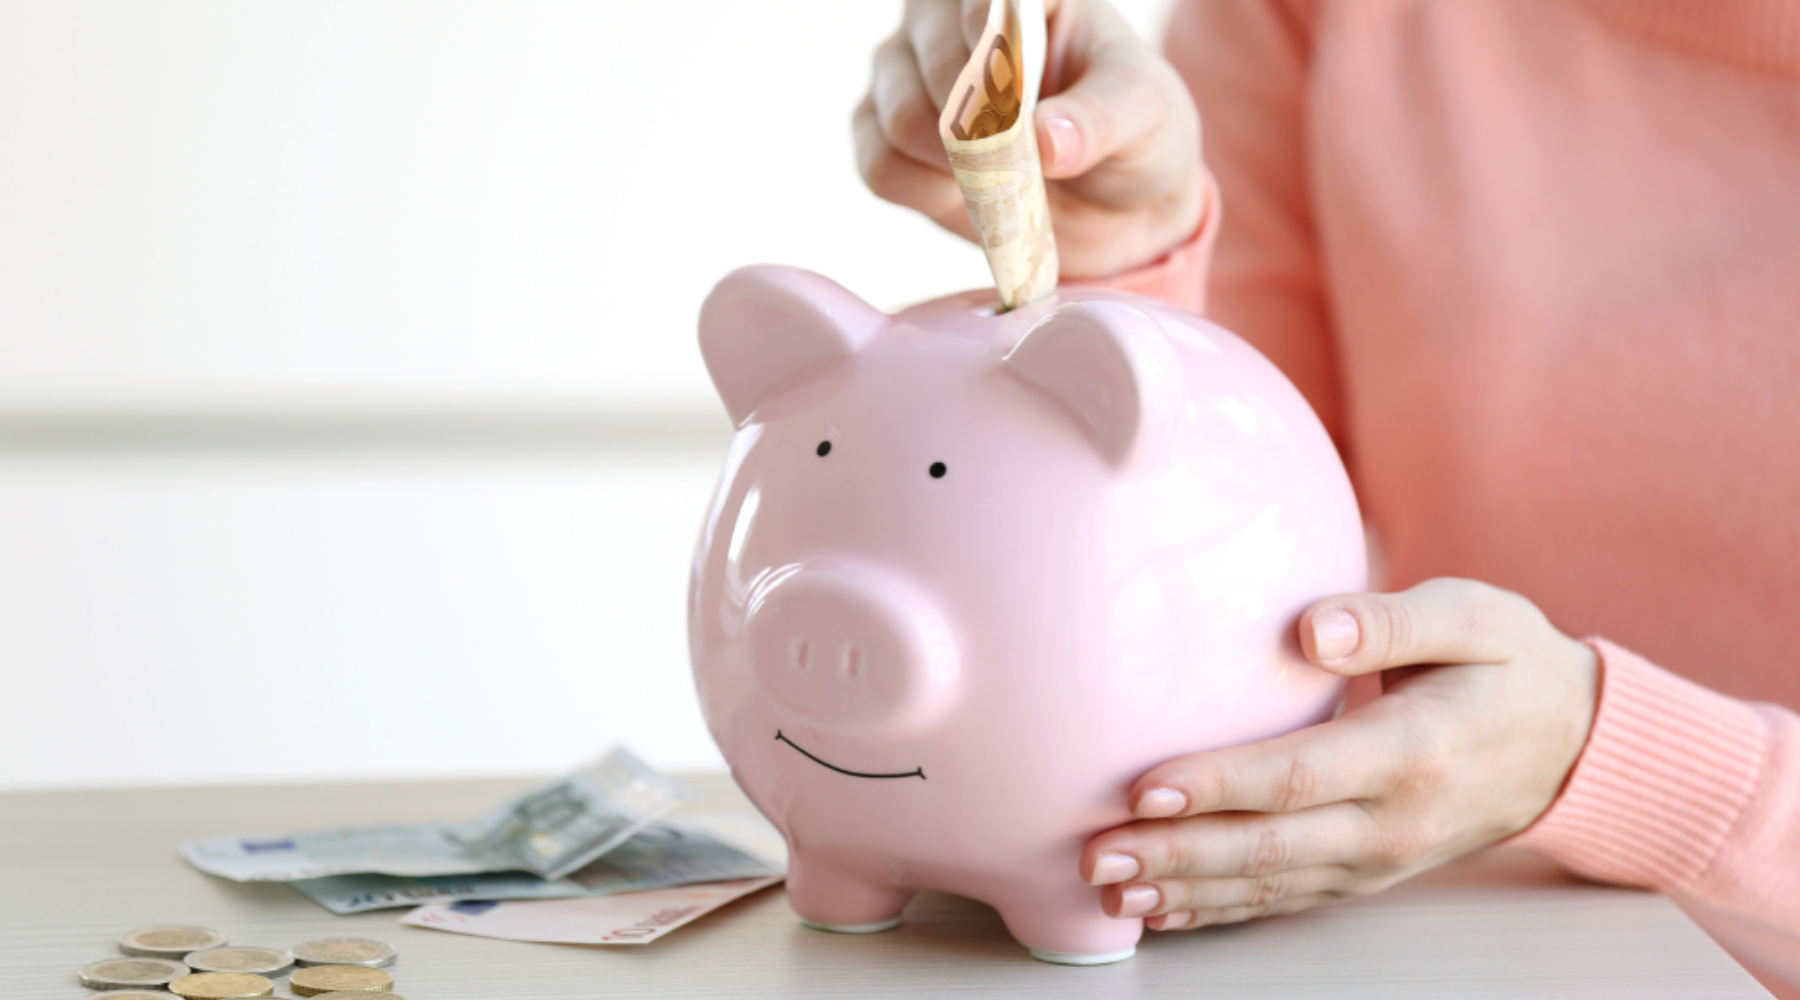 Easy Ways to Save Money Around Your Home